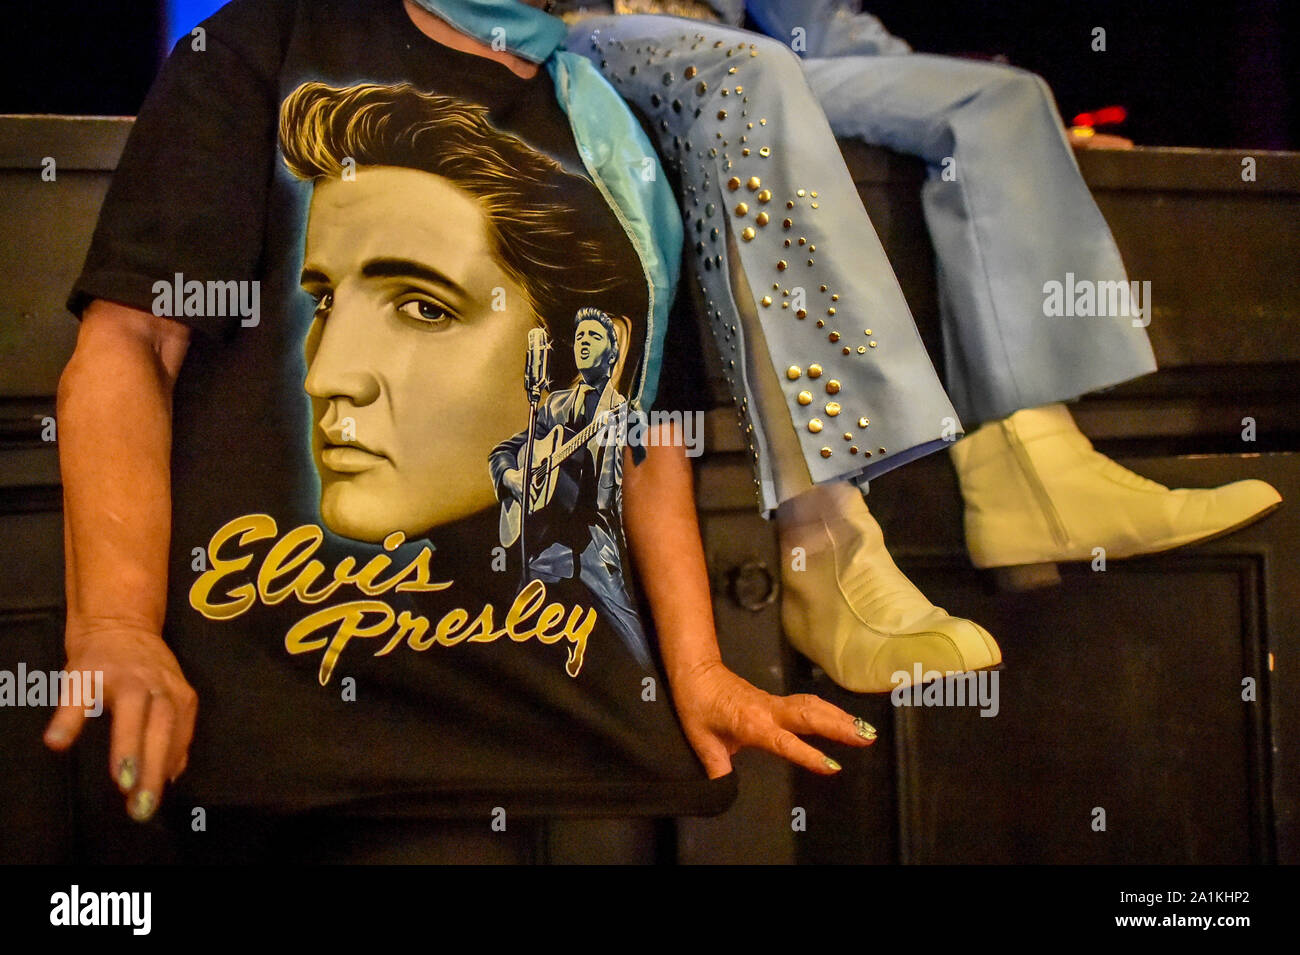 A woman wears an Elvis Presley t-shirt at the annual Porthcawl Elvis Festival in south Wales. The event draws thousands of Elvis fans to the Welsh seaside town to celebrate the 'King of Rock and Roll'. Stock Photo